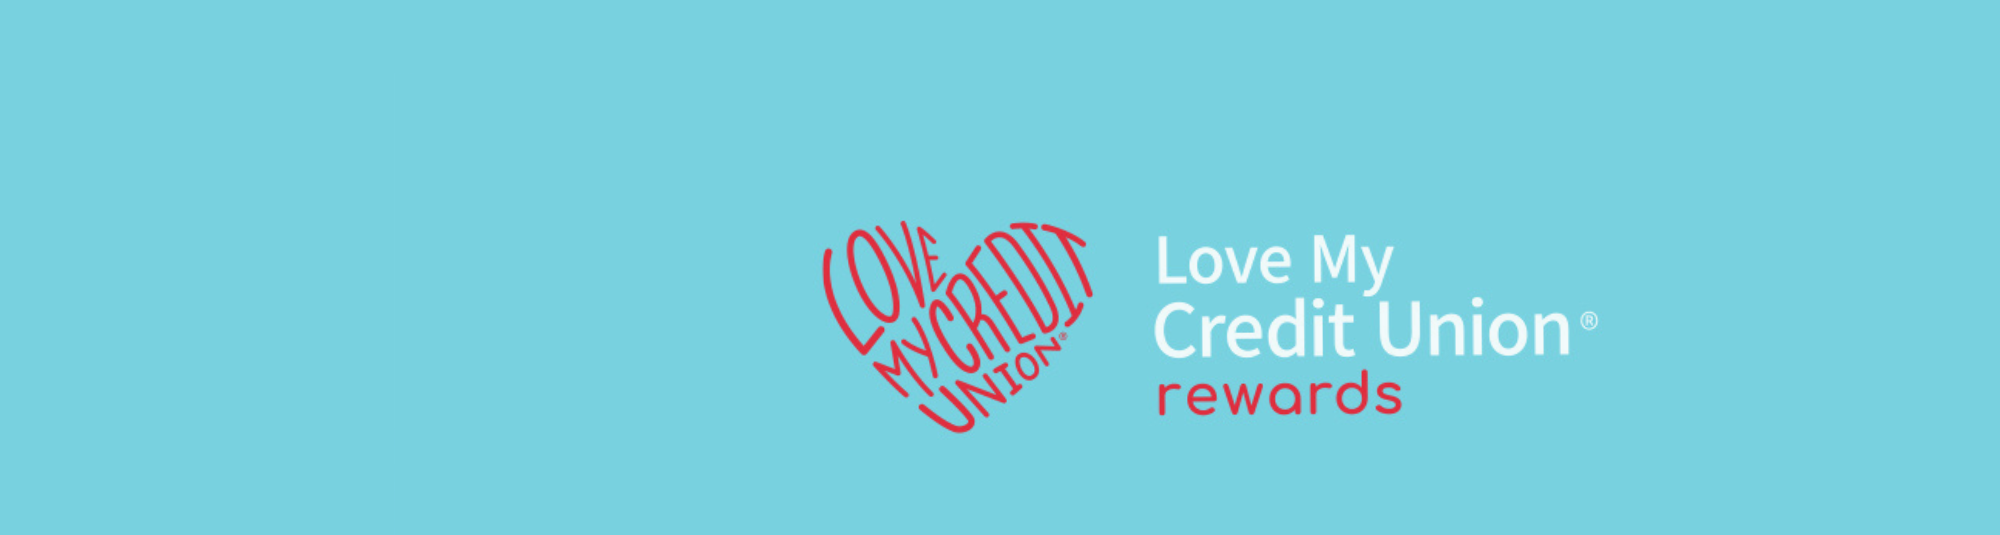 Love My Credit Union Rewards Logo on blue background with white and red text and heart-shaped text.